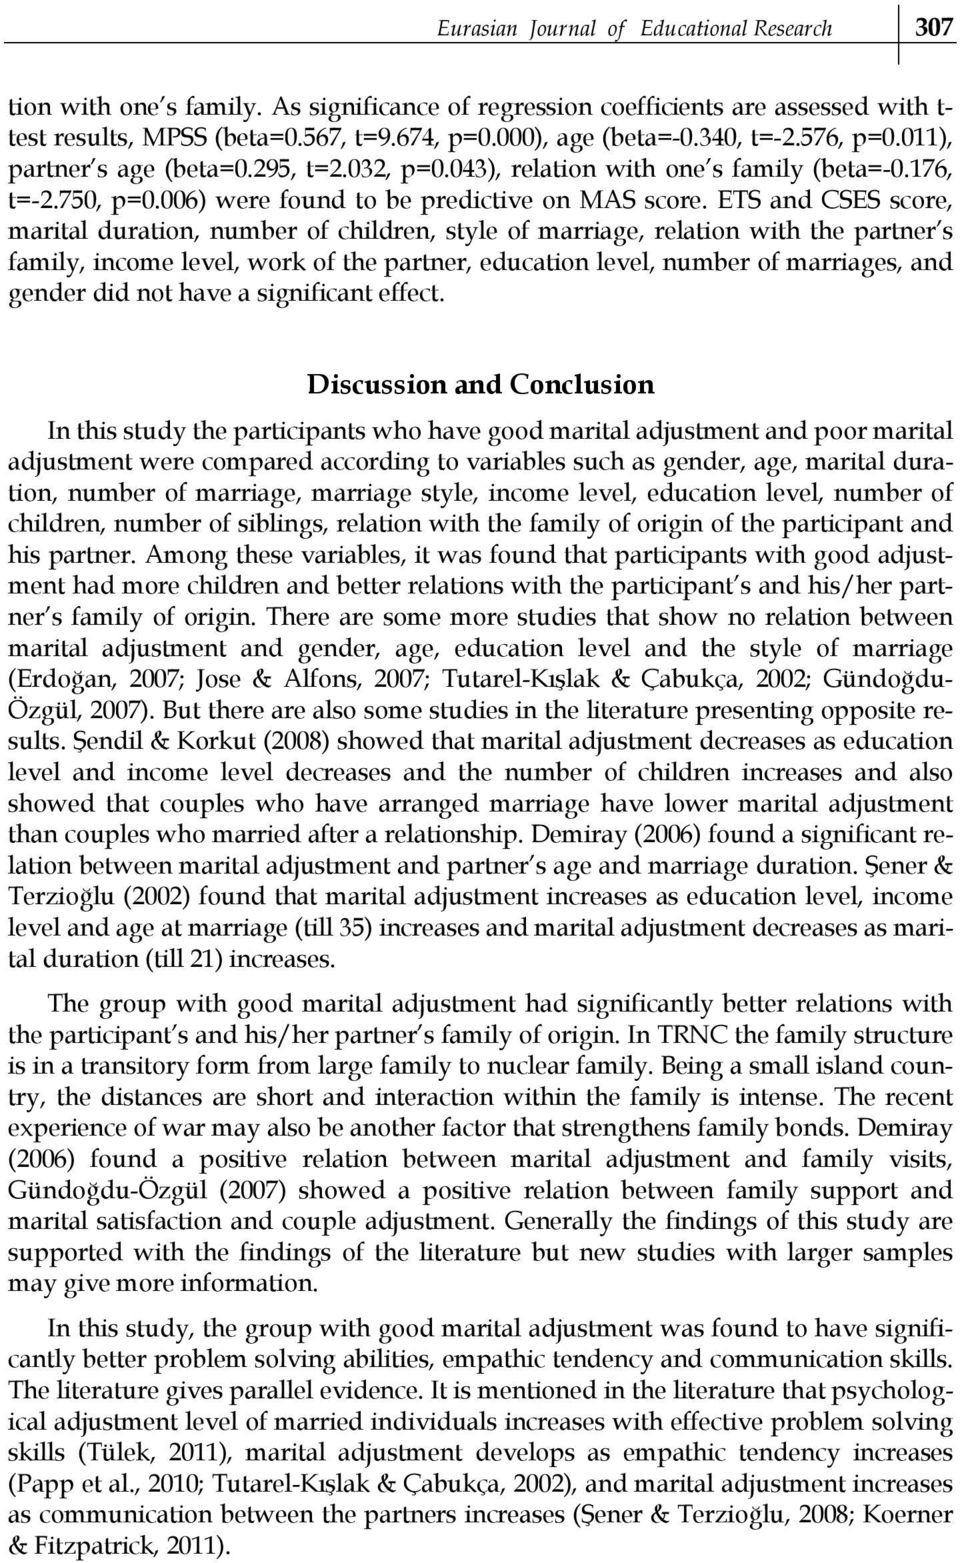 ETS and CSES score, marital duration, number of children, style of marriage, relation with the partner s family, income level, work of the partner, education level, number of marriages, and gender